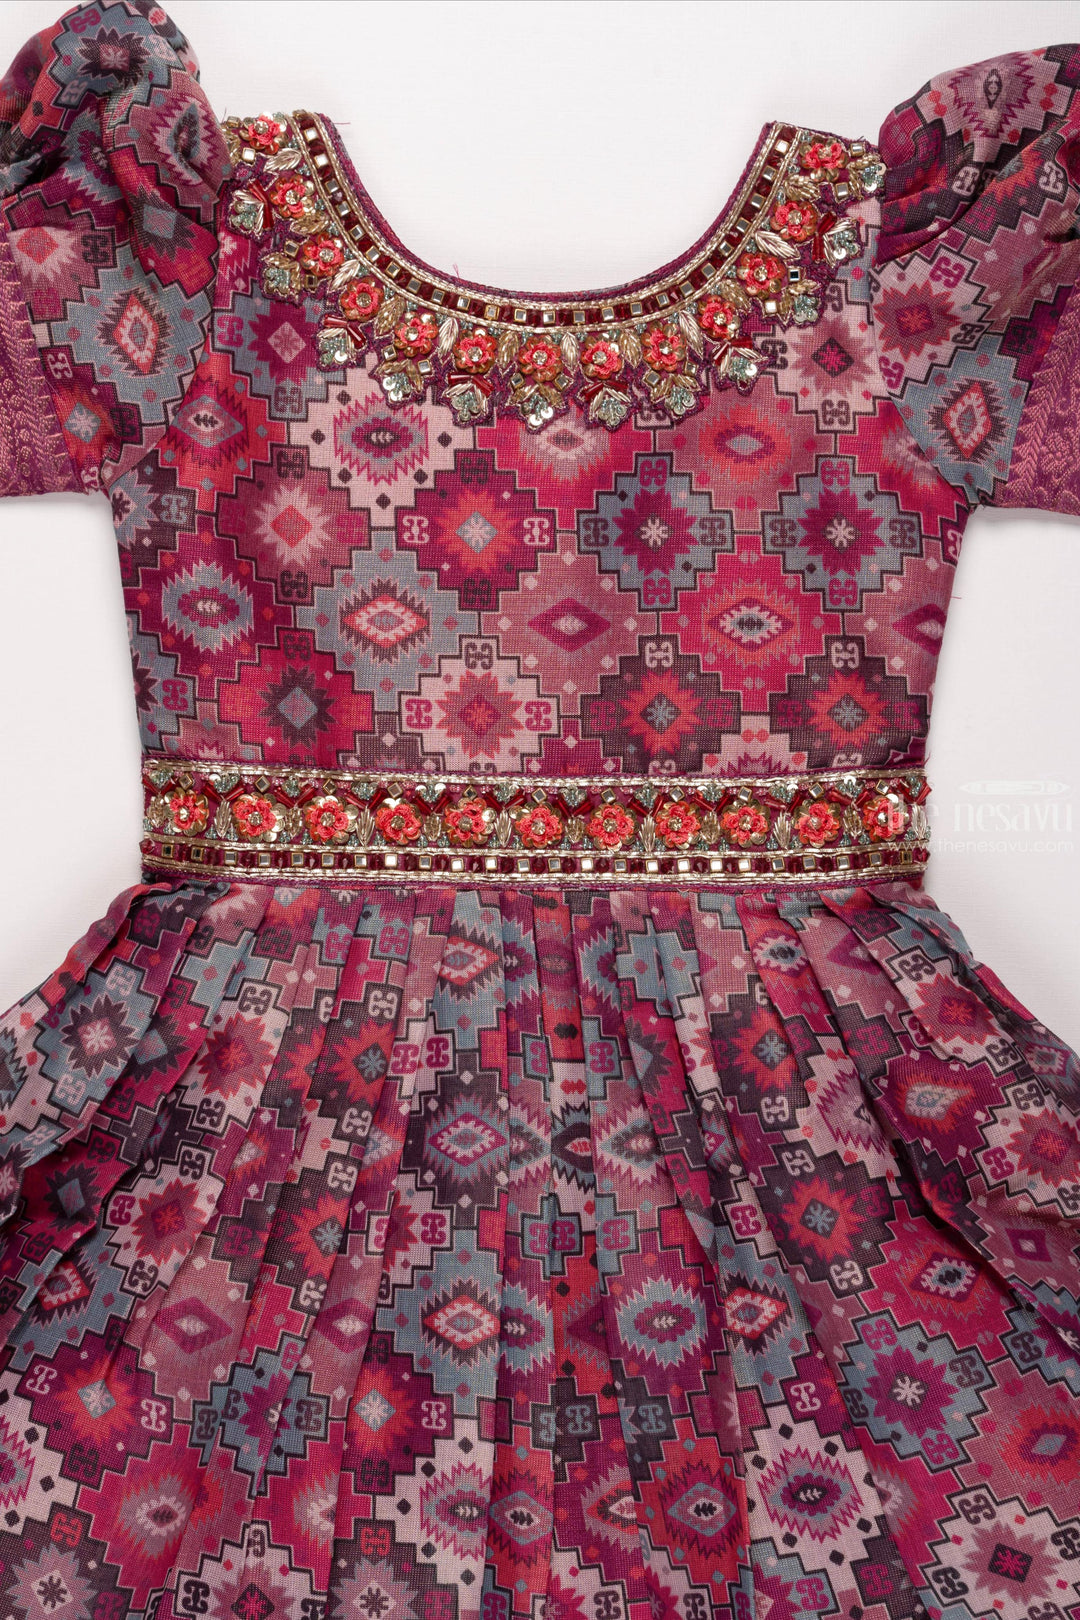 The Nesavu Girls Party Gown Twilight Traditions: Regal Ethnic Gown for Young Girls Nesavu Deep Maroon Ethnic Gown with Gold Accents | Timeless Elegance for Young Girls | The Nesavu